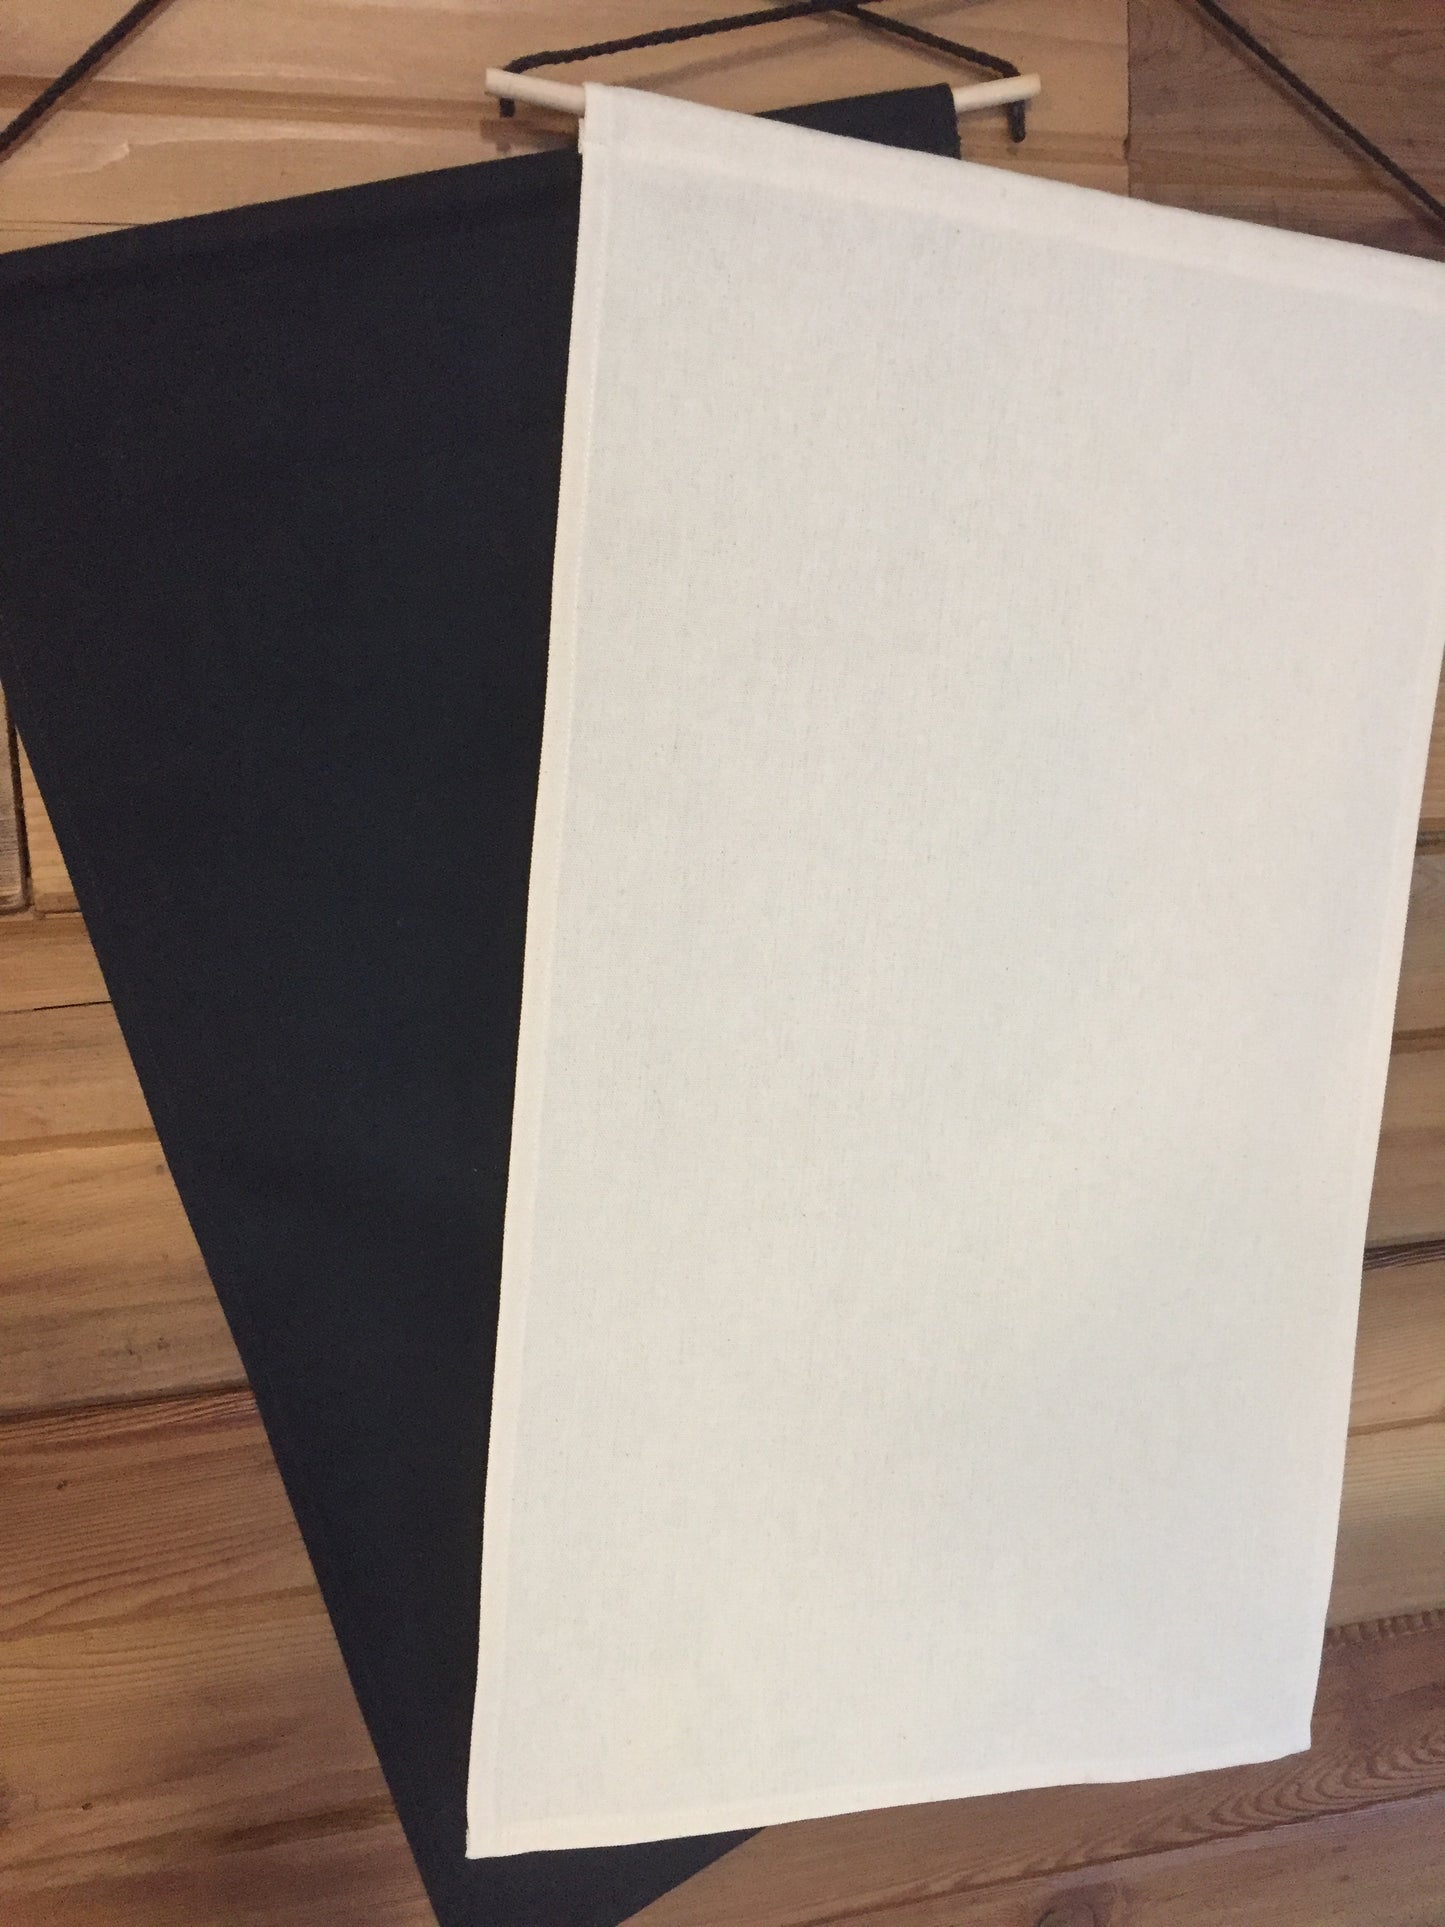 Blank Hanging Cloth Banner